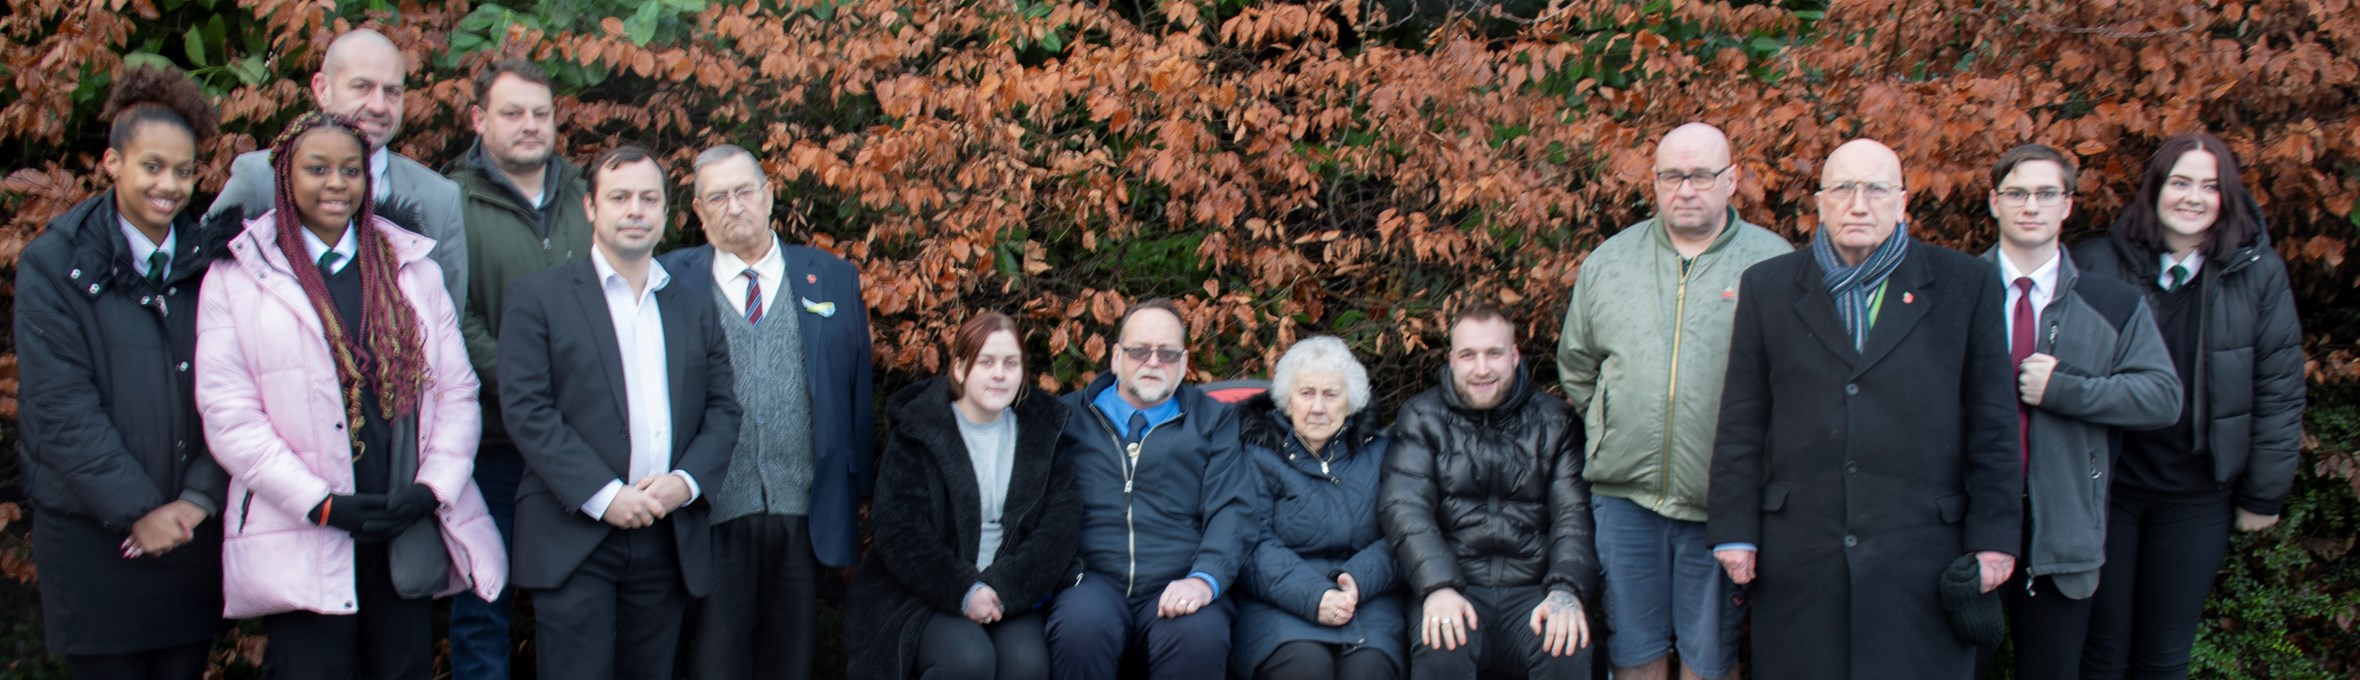 Cllr Blagdon Family and the commemorative bench